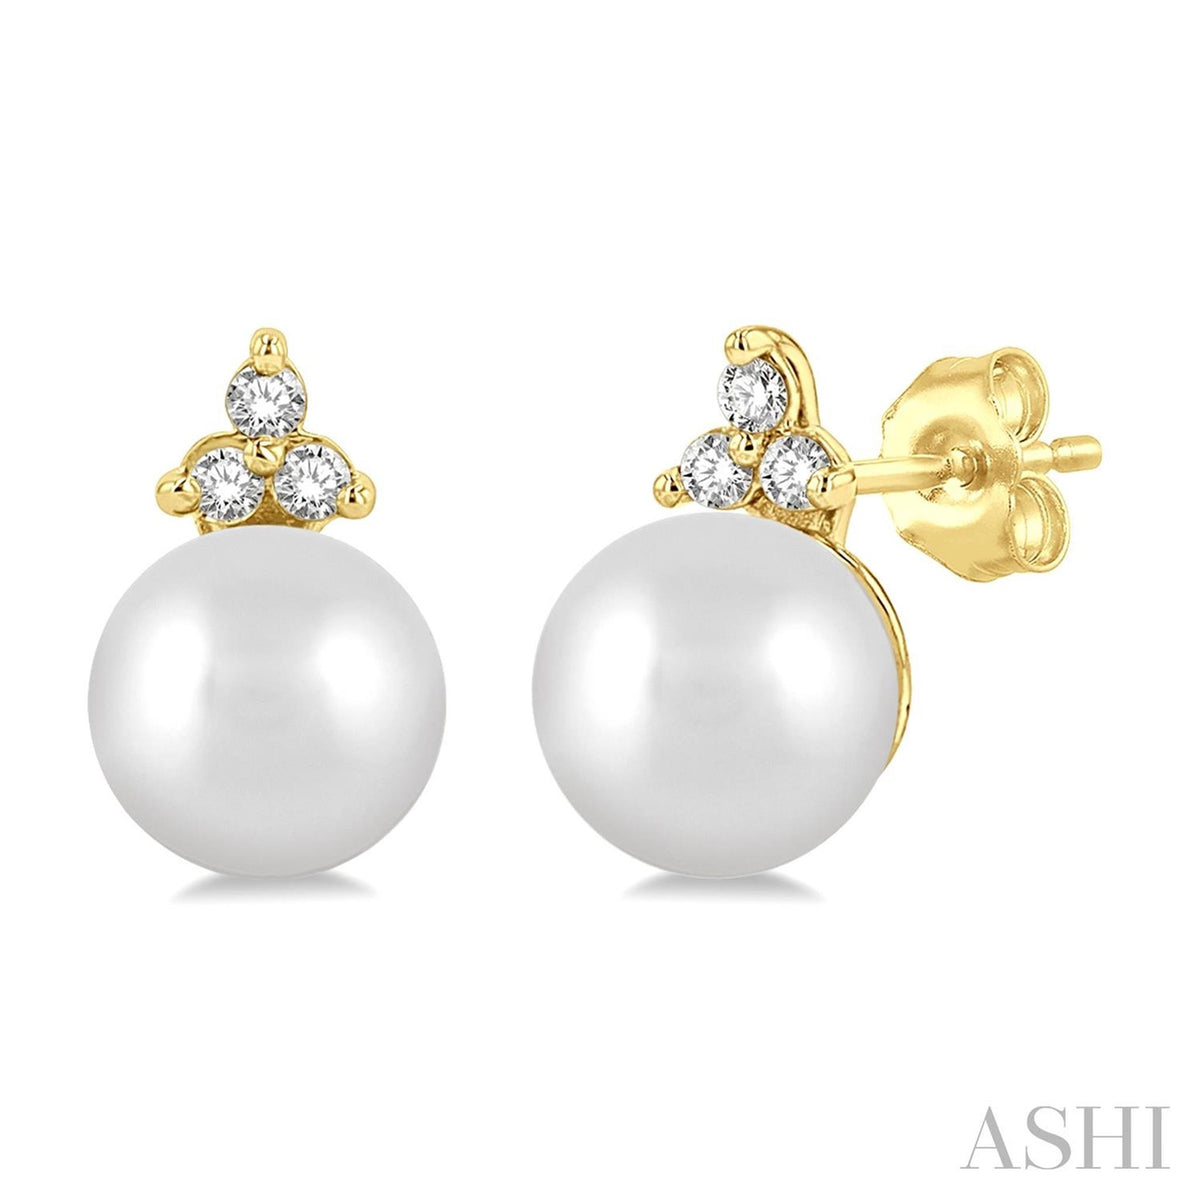 10Kt Yellow Gold Classic Stud Earrings With 5.5mm Akoya Cultured Pearl and Natural Diamonds